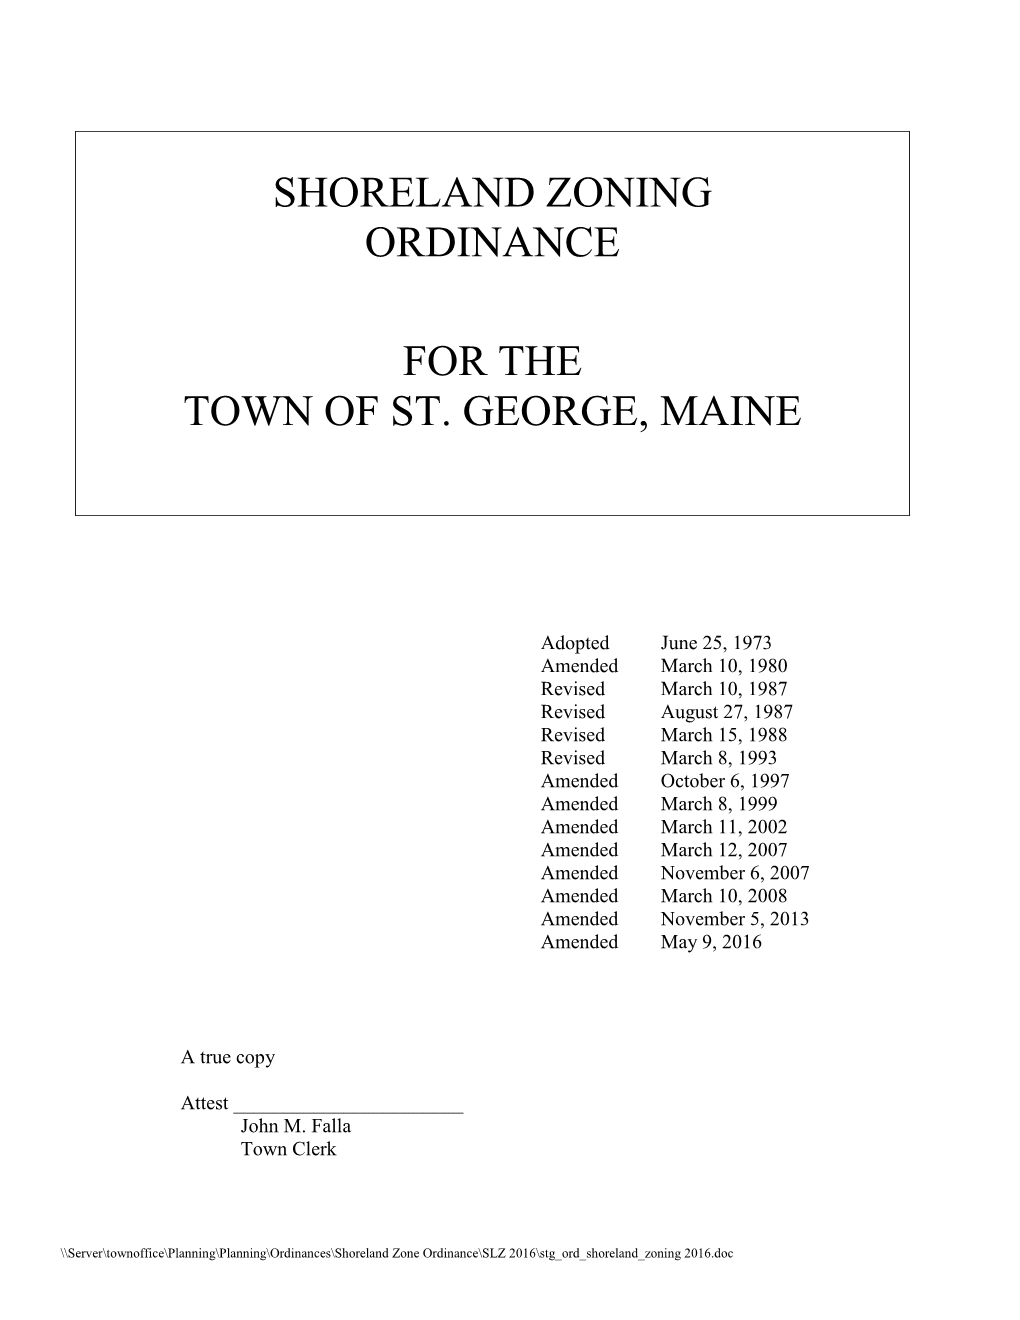 Shoreland Zoning Ordinance for the Town of St. George, Maine